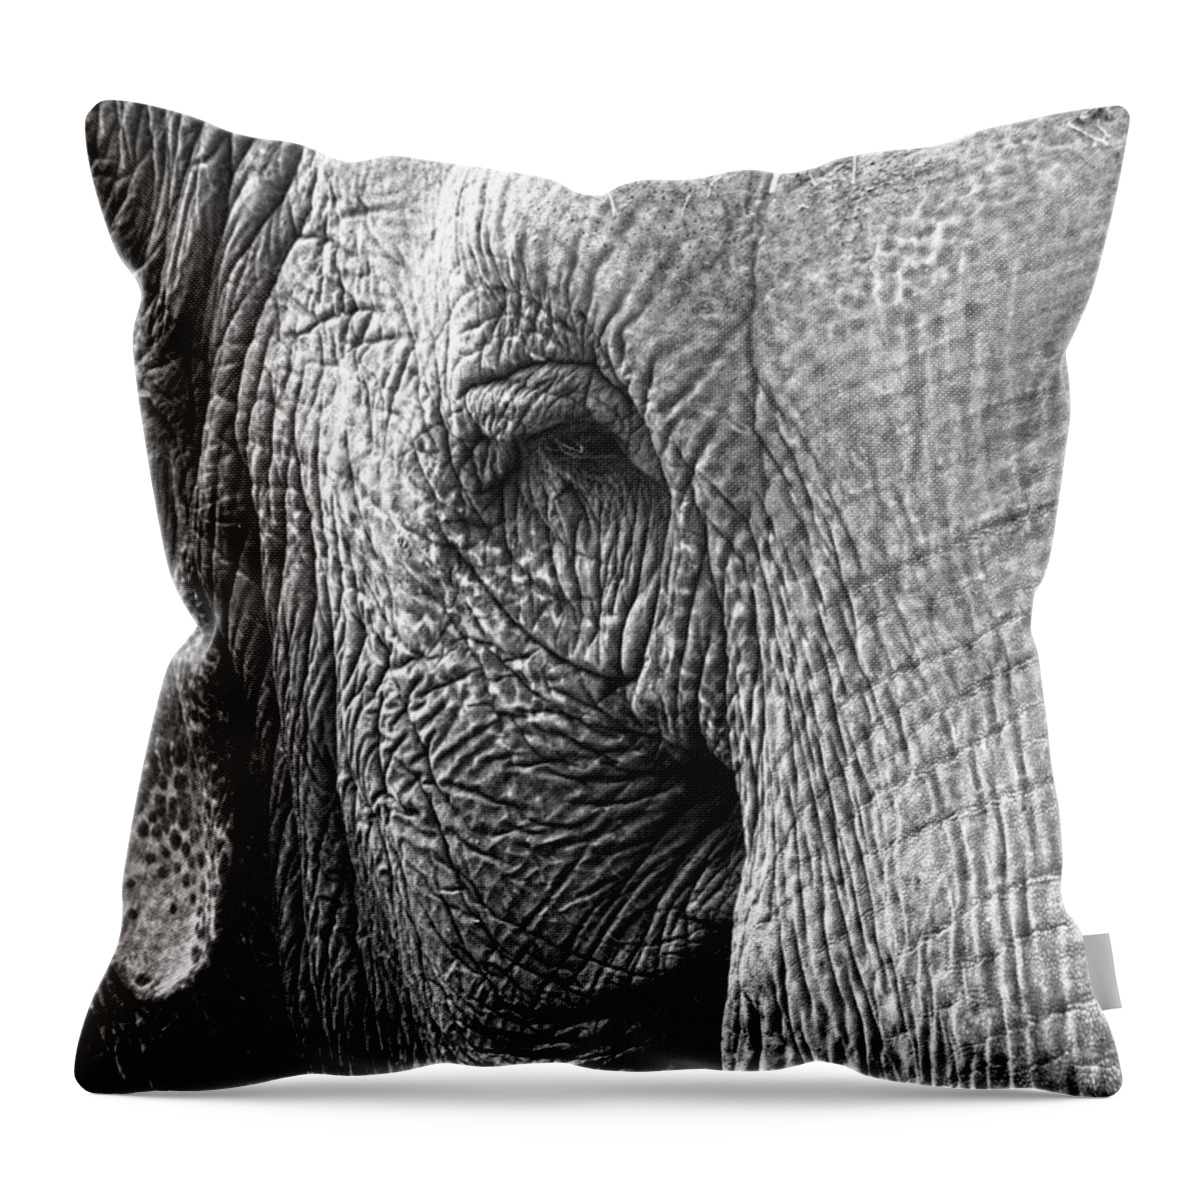 Elephant Throw Pillow featuring the photograph Years Remembered by J C